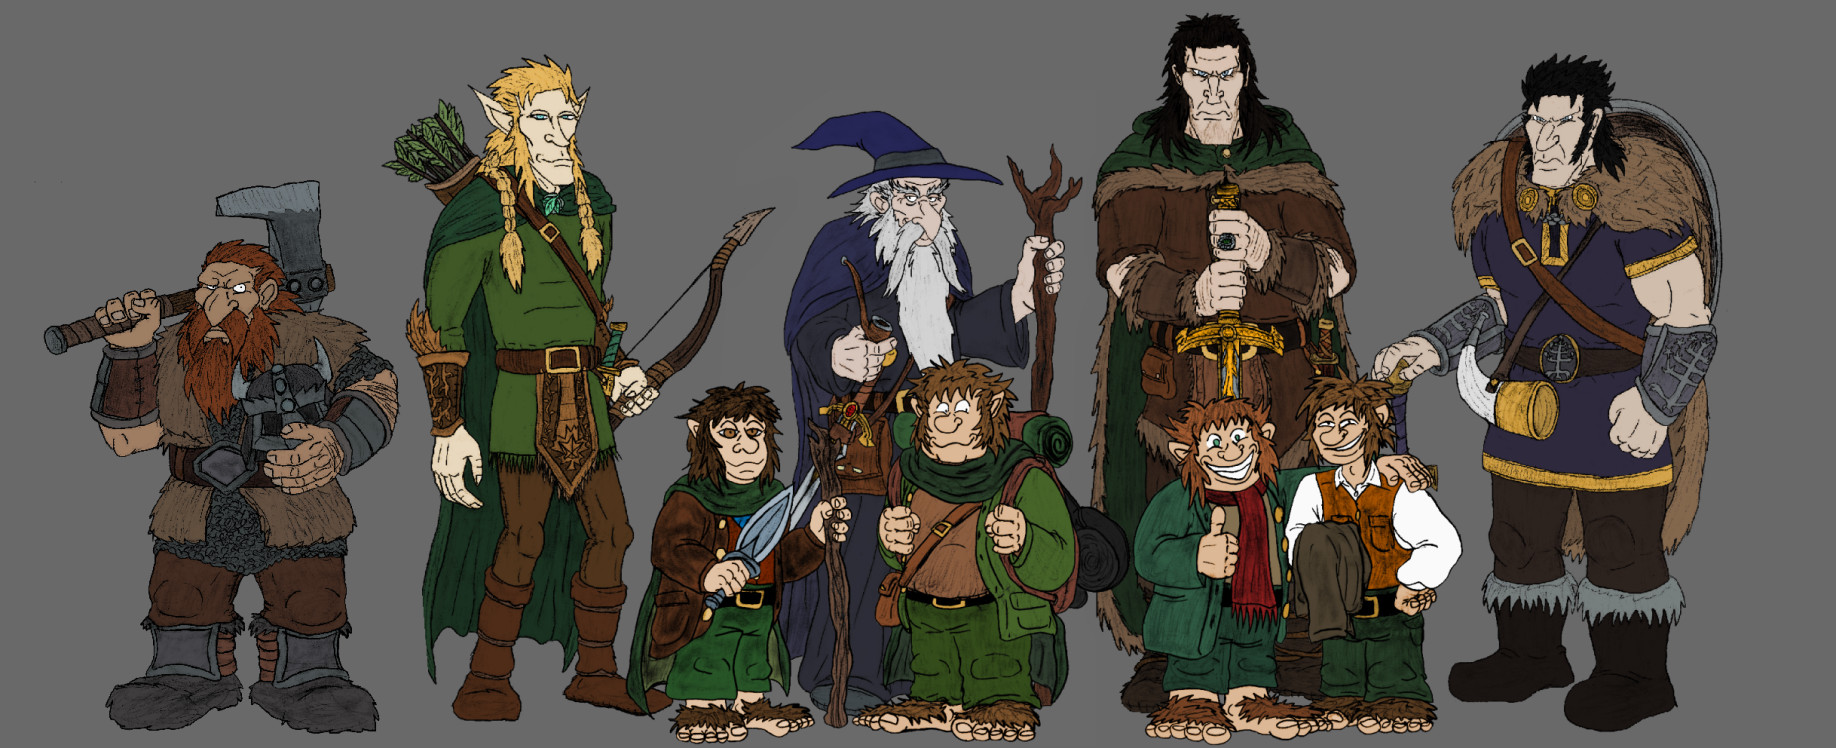 The lord of the rings: return of the king by agustin09 on DeviantArt